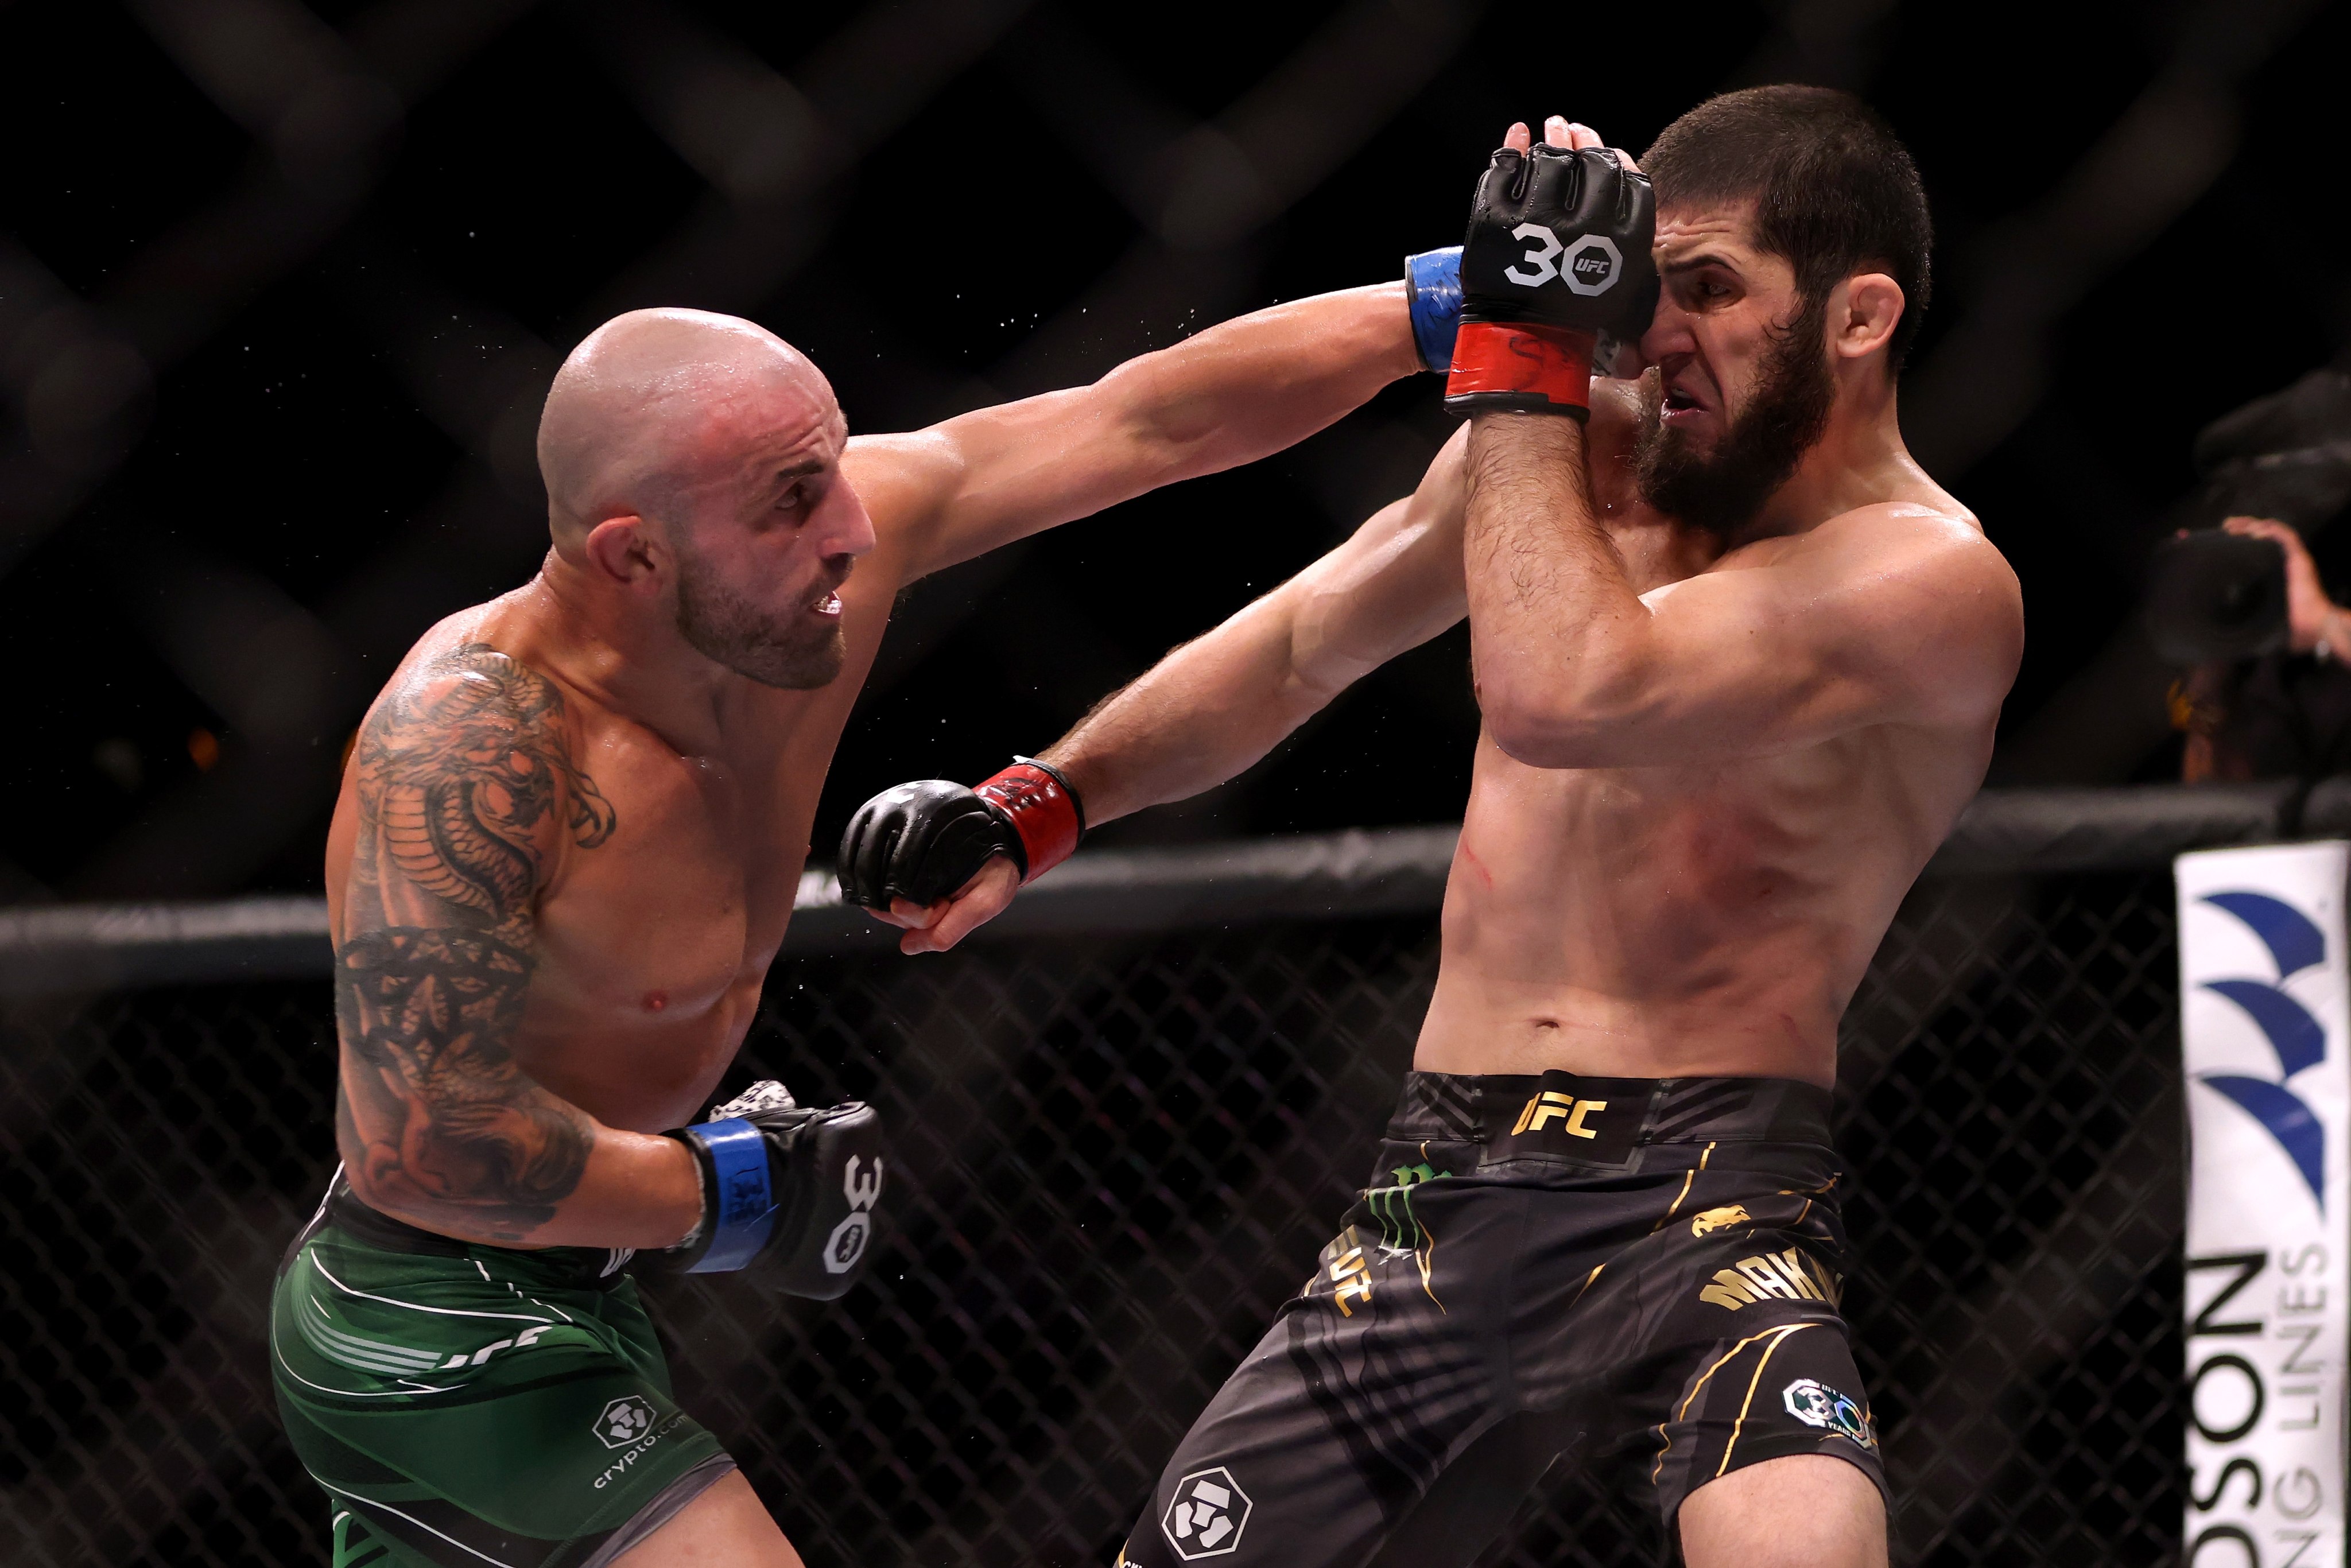 Alex Volkanovski (left) and Islam Makhachev in action during their lightweight title bout at UFC 284 at RAC Arena in Perth, Australia. Photo: EPA-EFE